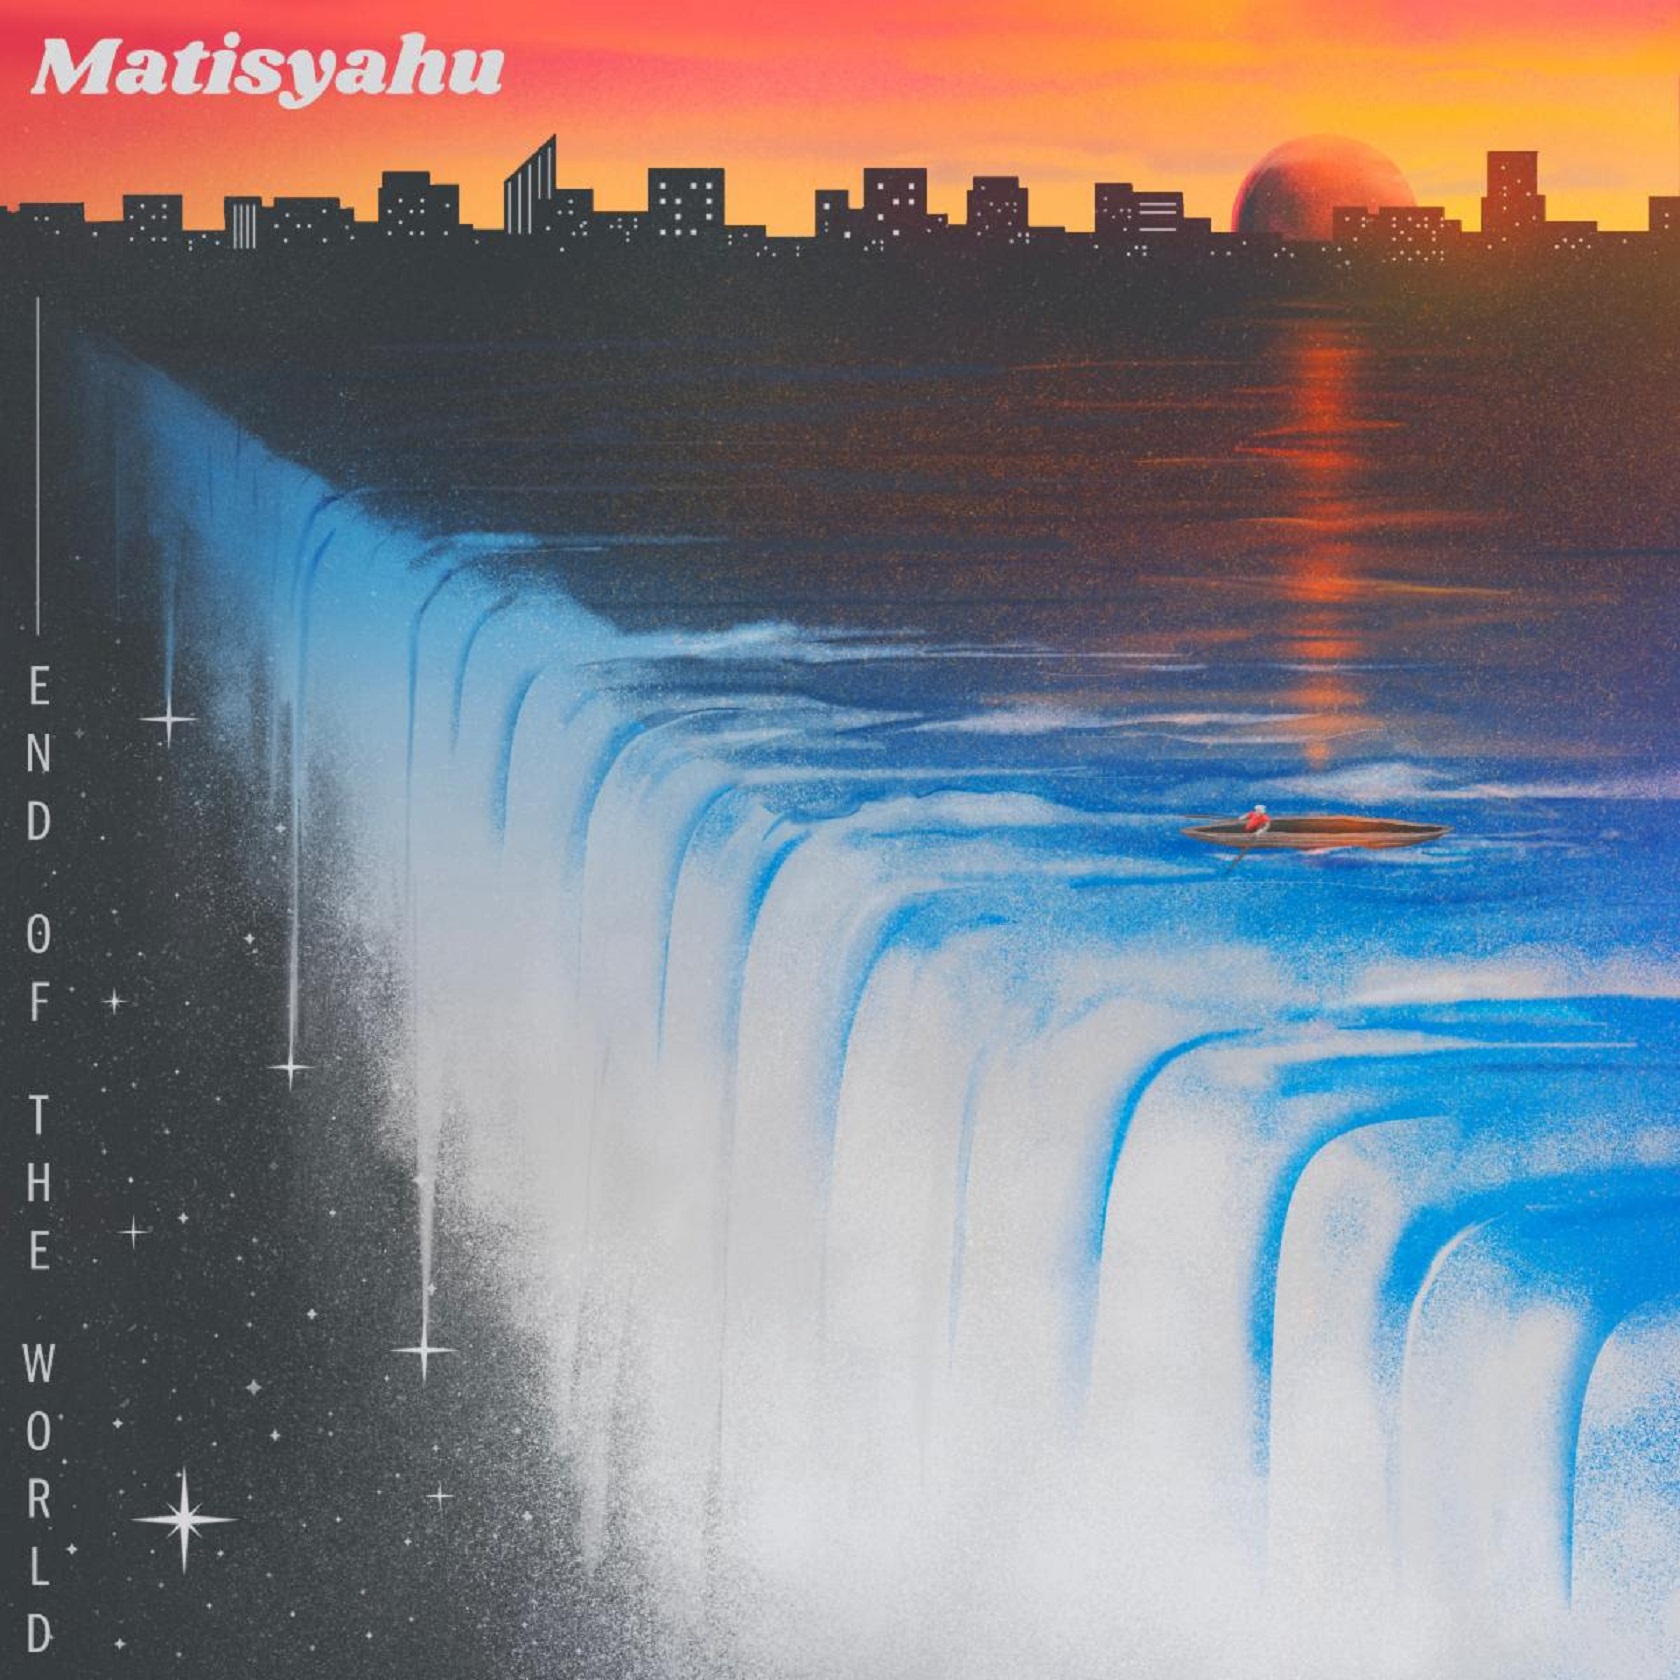 Matisyahu Releases New Single "End Of The World" // New EP 'Hold The Fire' Out February 2nd